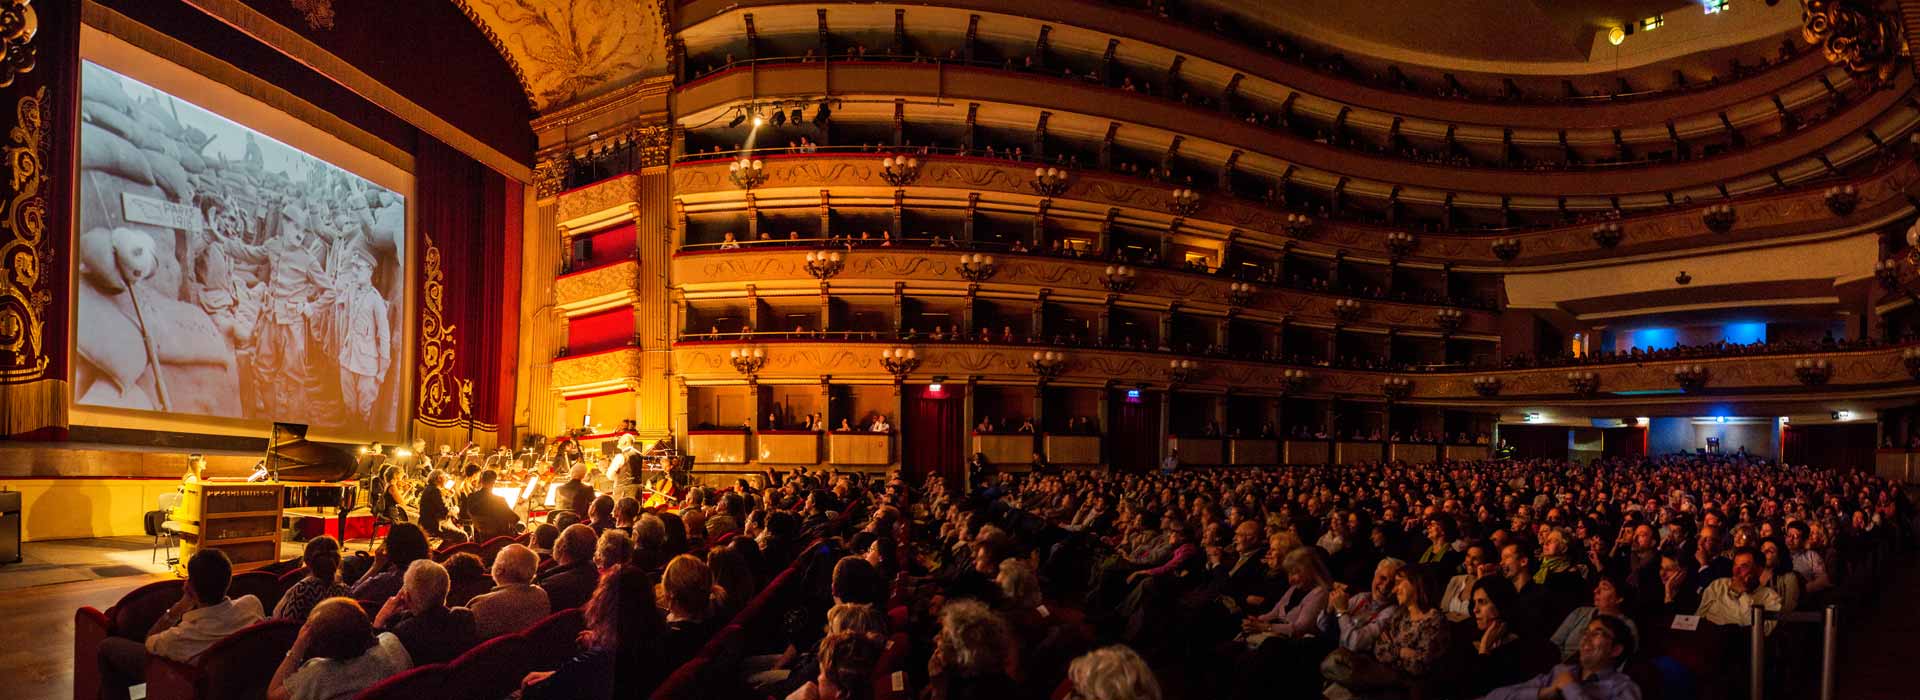 Here are some important theaters in Florence